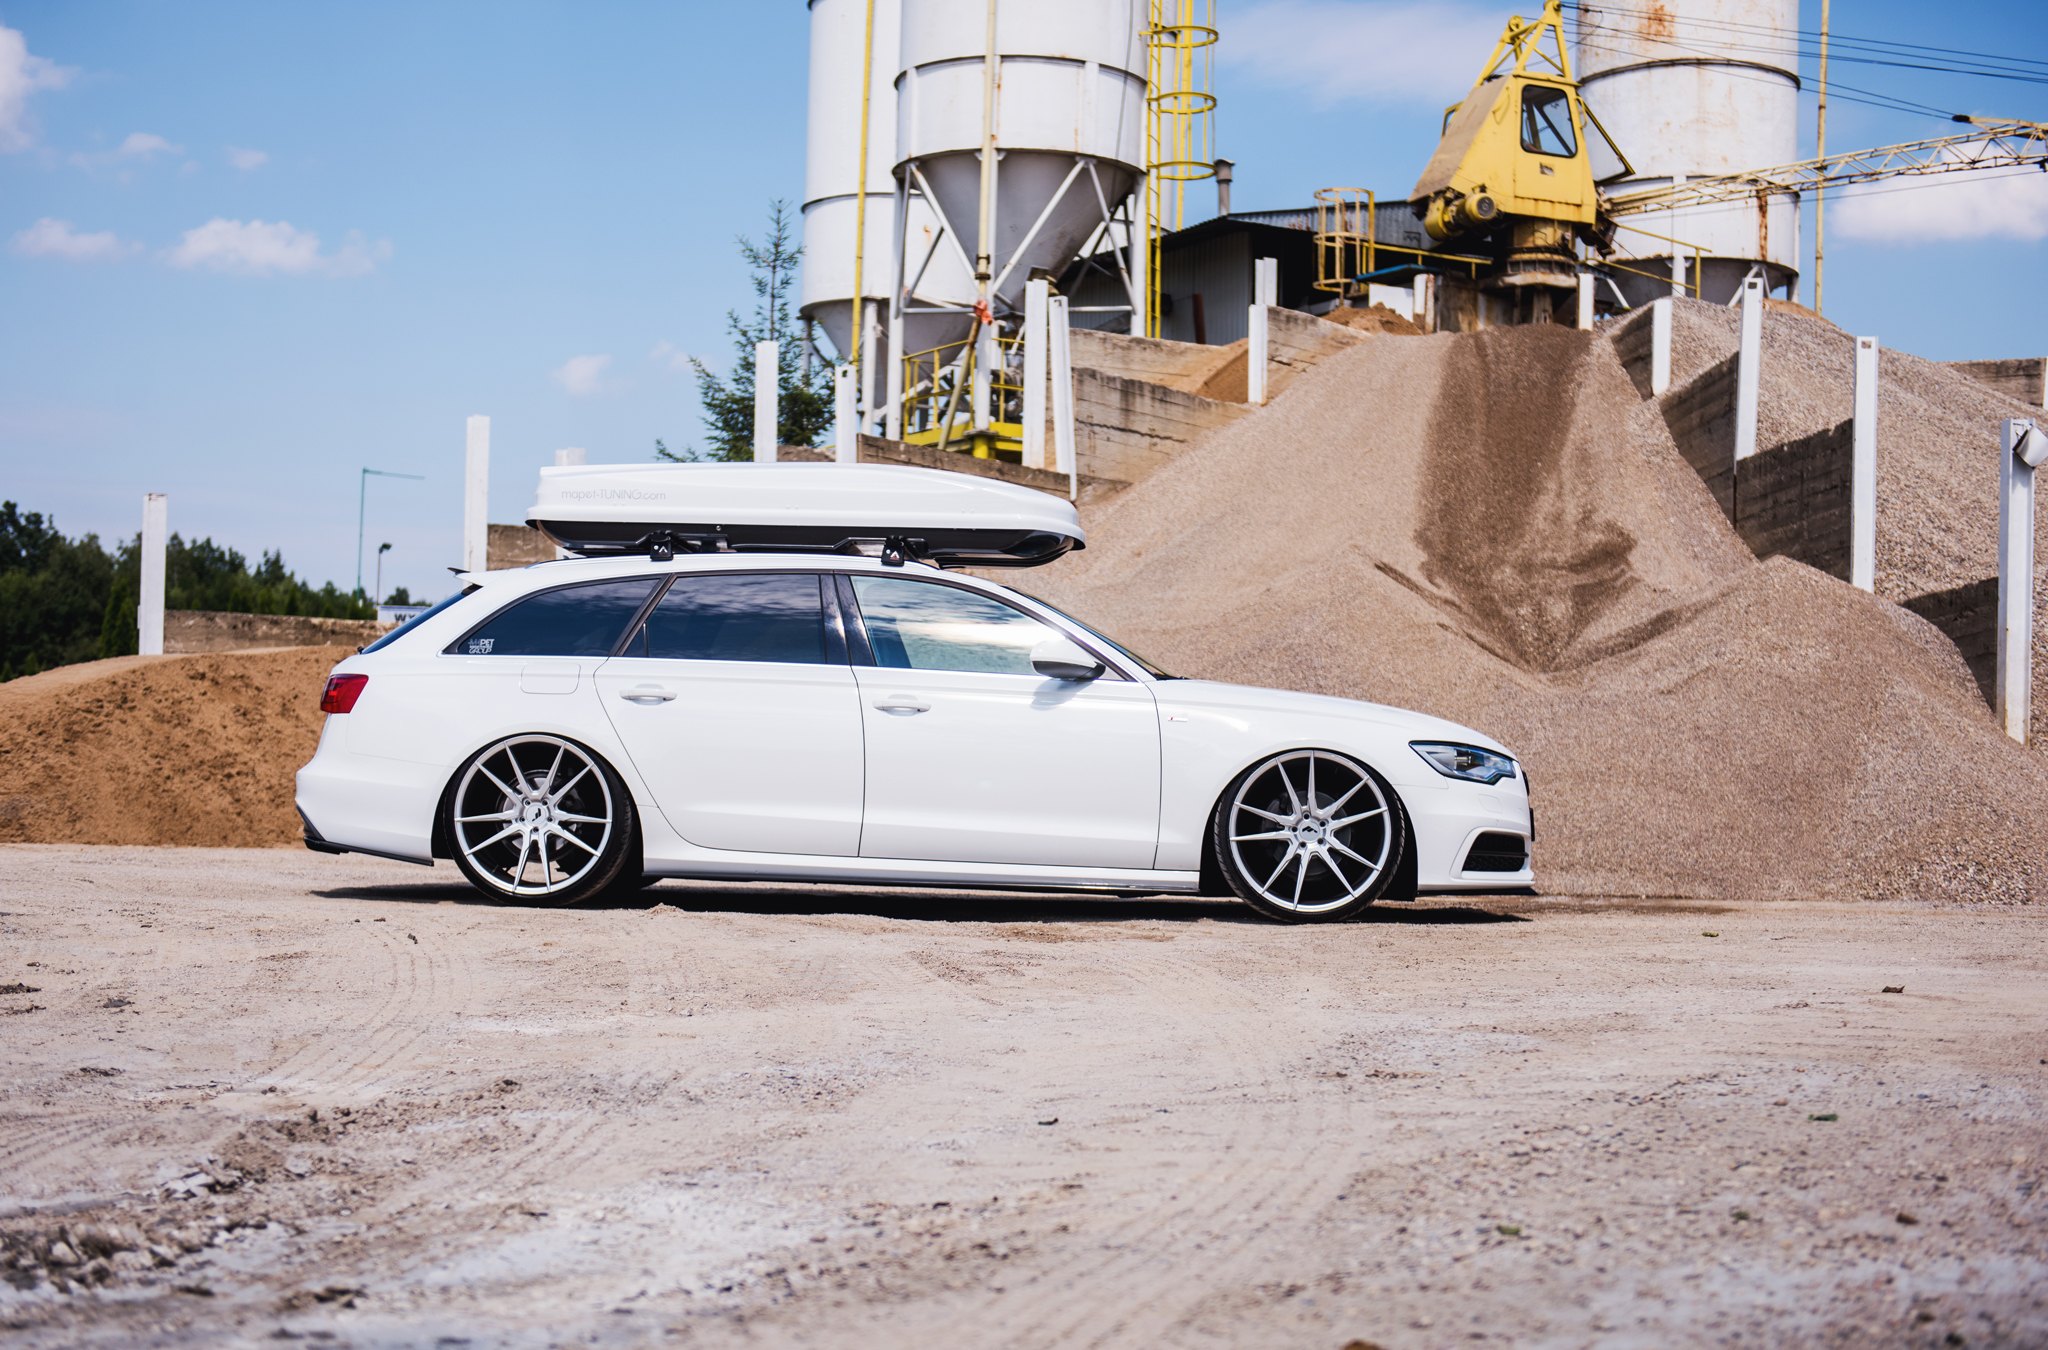 Aftermarket Side Skirts on White Audi A6 - Photo by JR Wheels